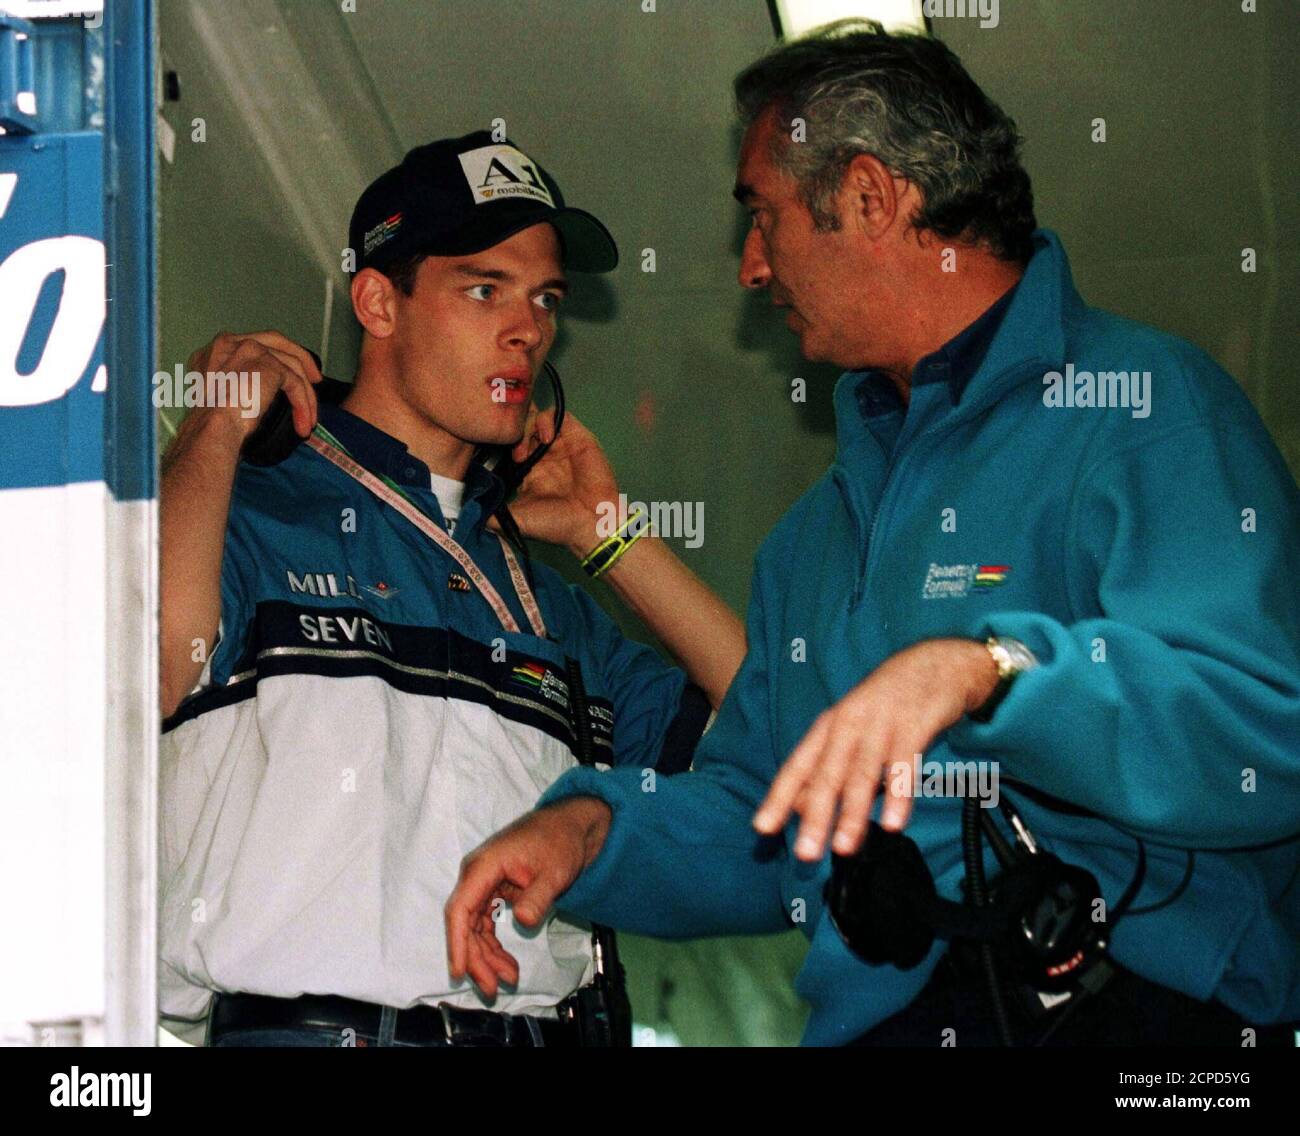 Austrian Formula One driver Alexander Wurz (L) talks to Flavio Briatore of Benetton  Renault in the Paddock area of the Austrian Grand Prix, September 19.  Briatore announced on Friday, that Wurz will